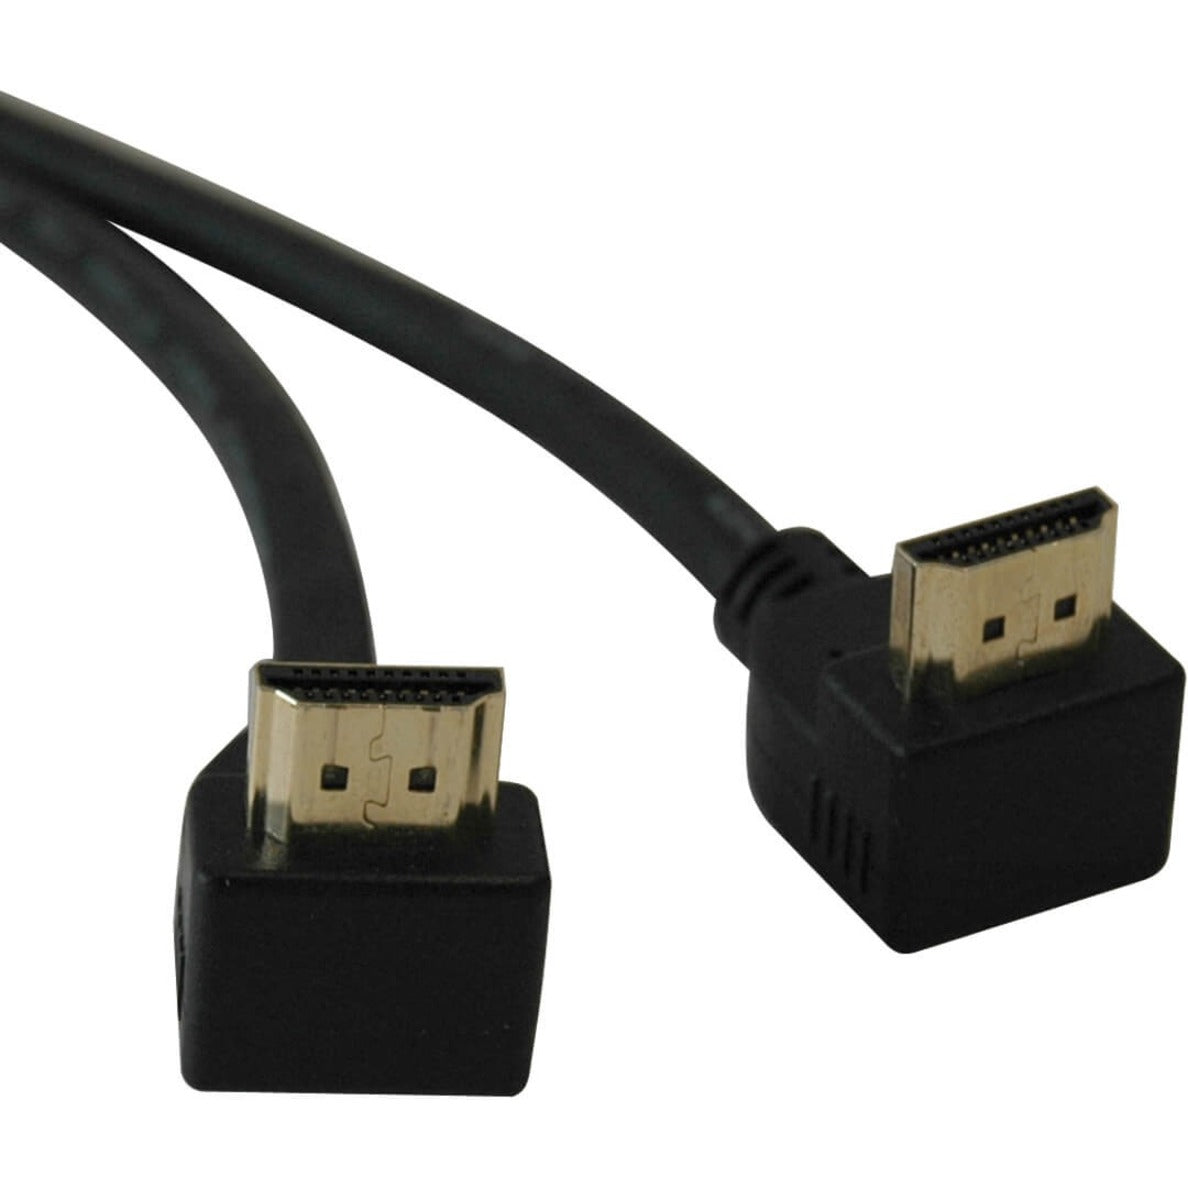 Tripp Lite P568-006-RA2 HDMI Cable (Right Angle), 6ft Gold Digital Video Cable with Reversible Connectors, 18 Gbit/s Data Transfer Rate